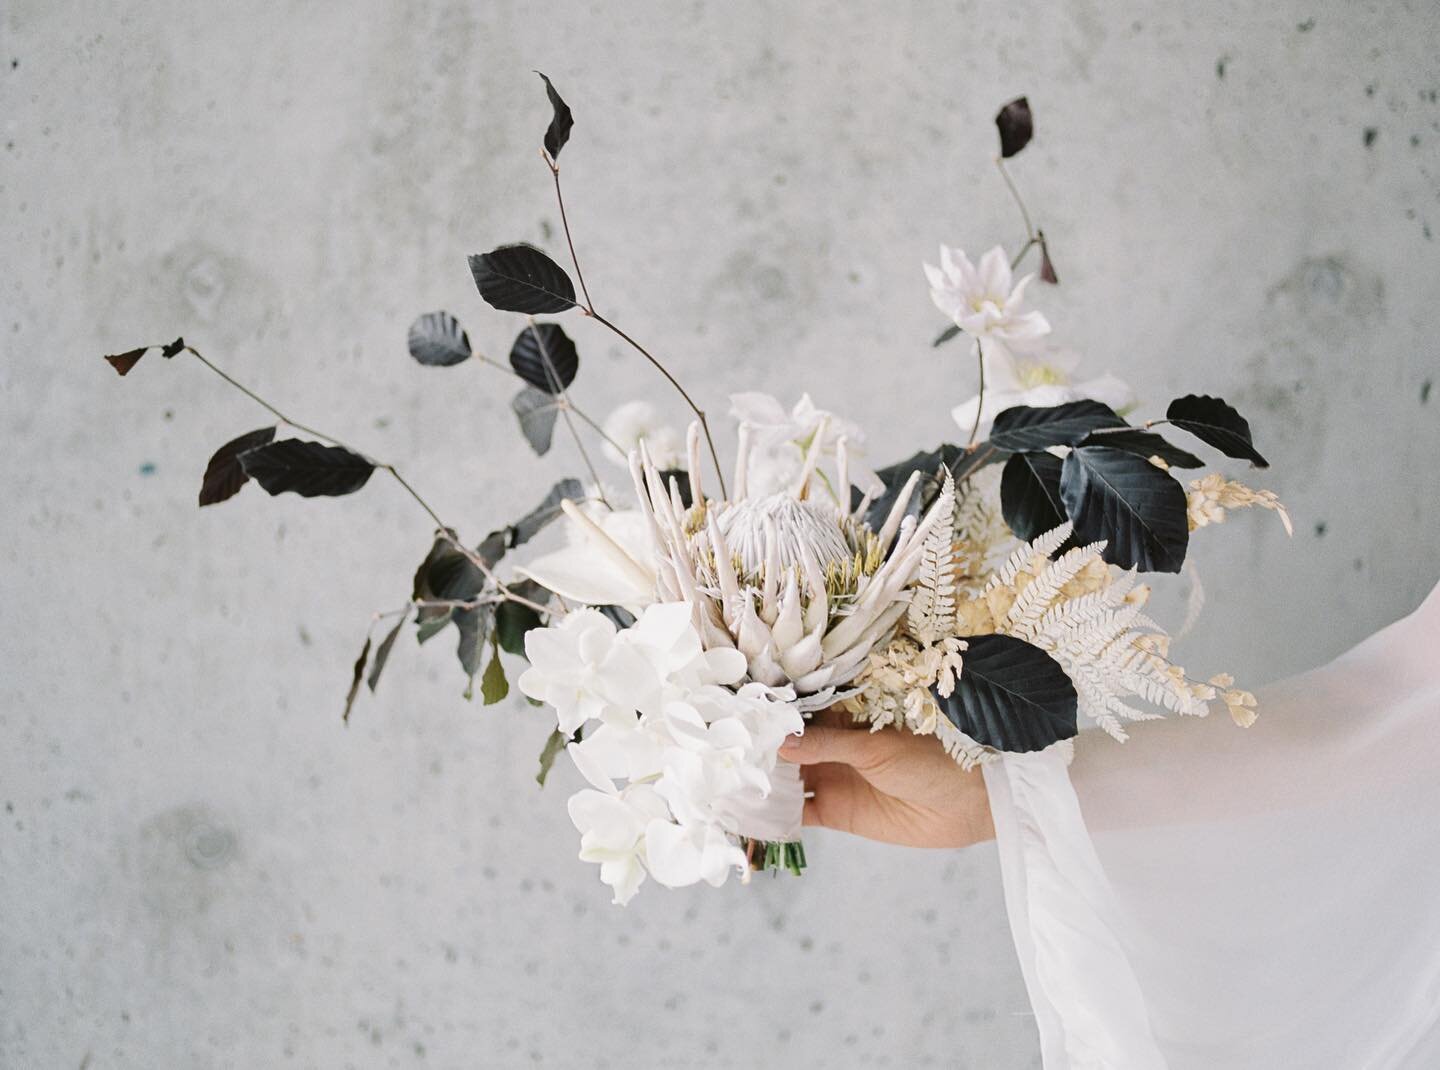 The textures in this bouquet are everything. Proof that neutral most definitely does not equal boring.
.
.
.

Photographer | @ashleycookphoto
Venue | @jupiterhotel
Florist | @wildflower_portland
Cake | @dreamcakespdx
Rentals | @greatjonesnw
Gown | @a